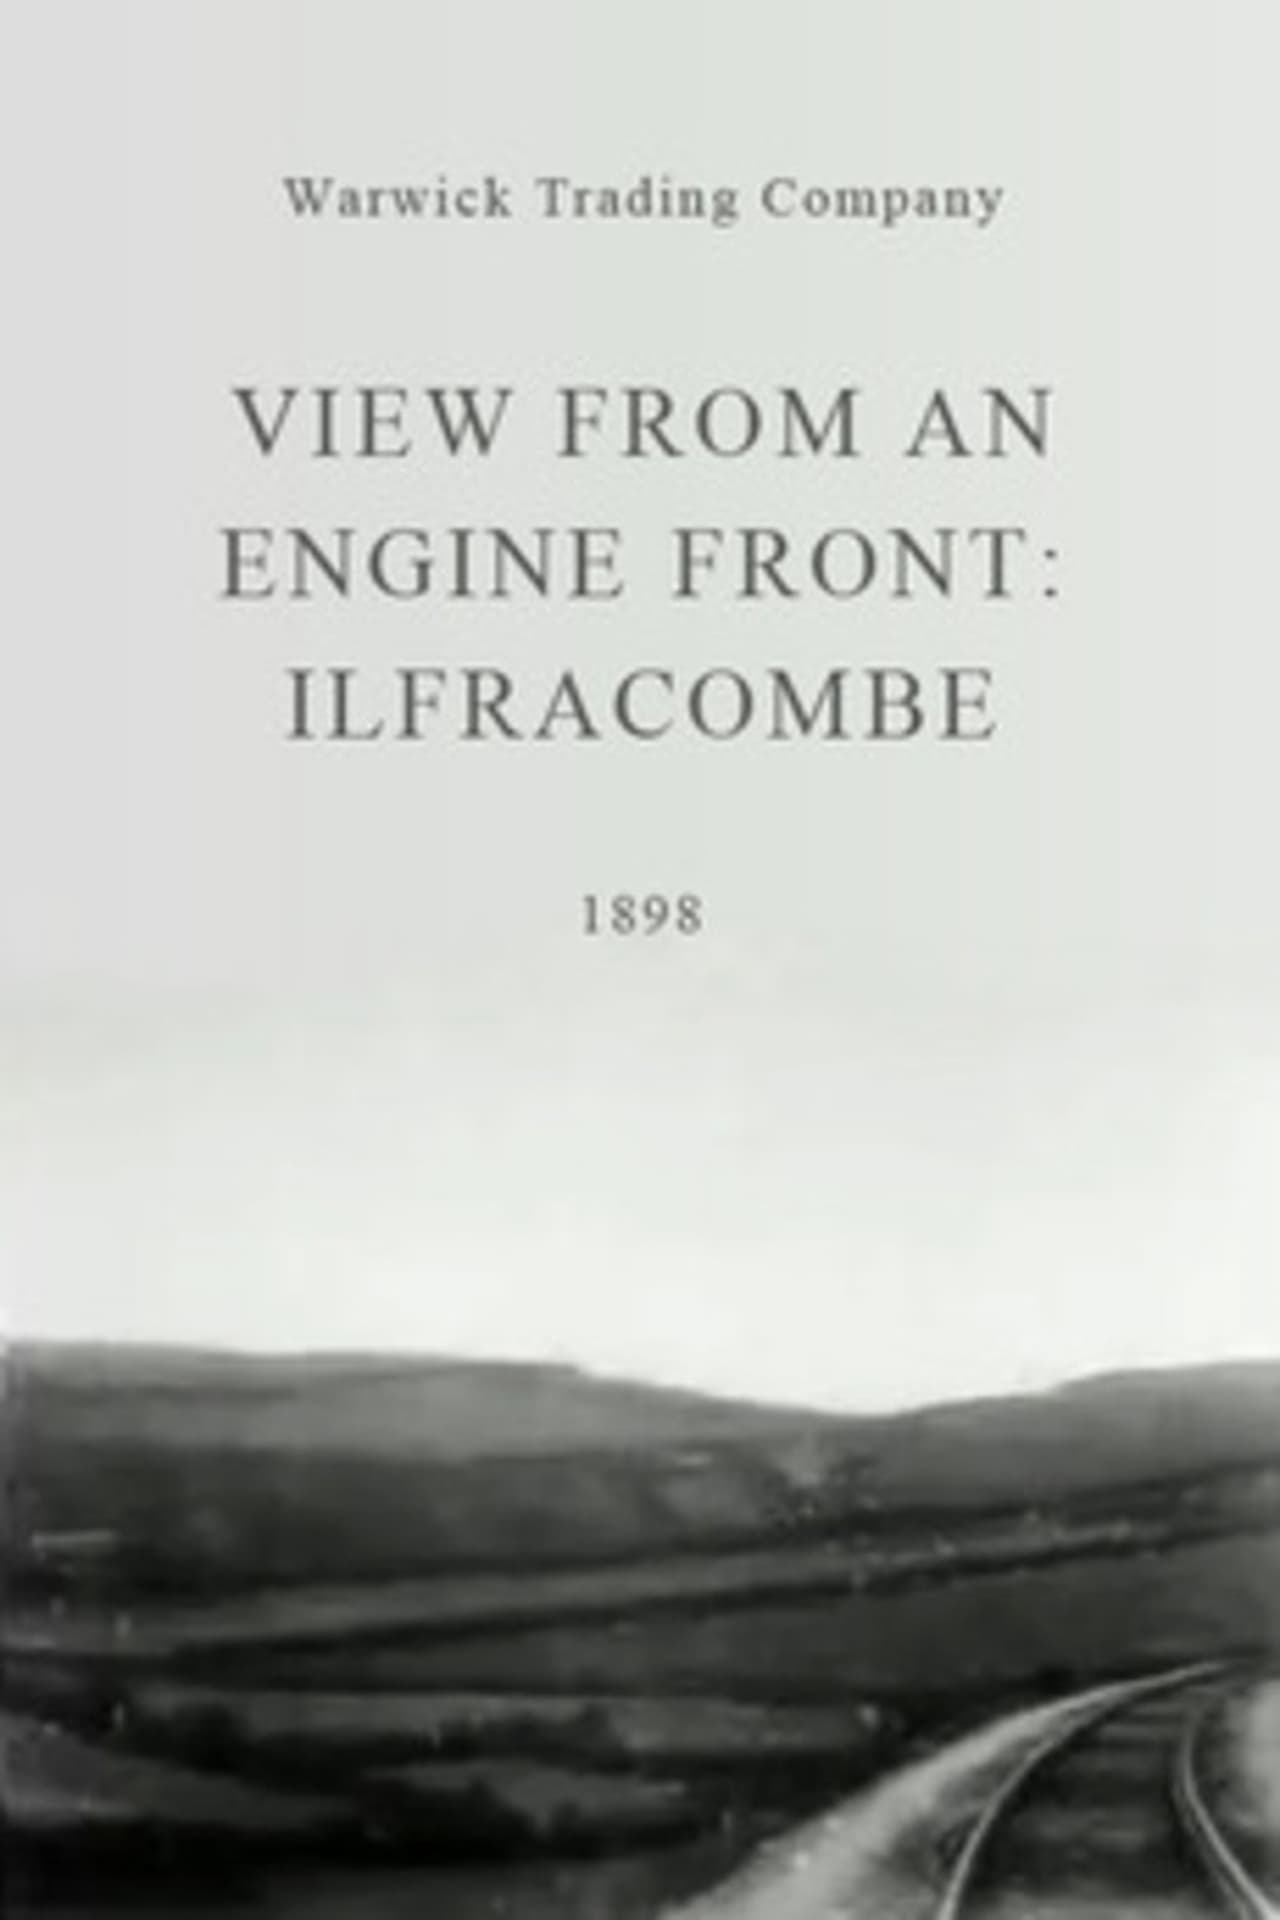 View from an Engine Front: Ilfracombe